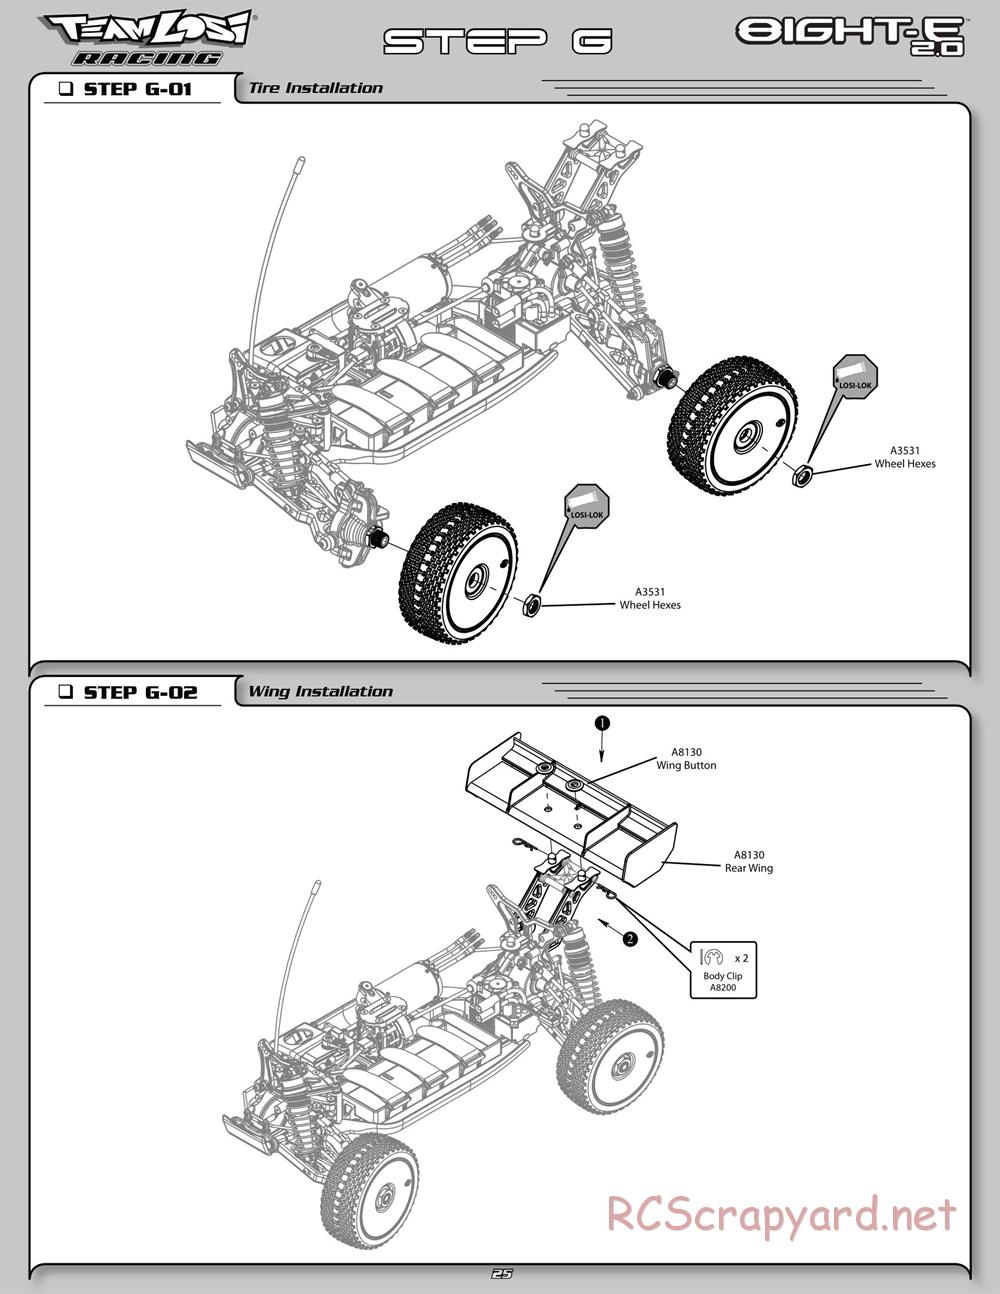 Team Losi - 8ight-E 2.0 Race Roller - Manual - Page 32